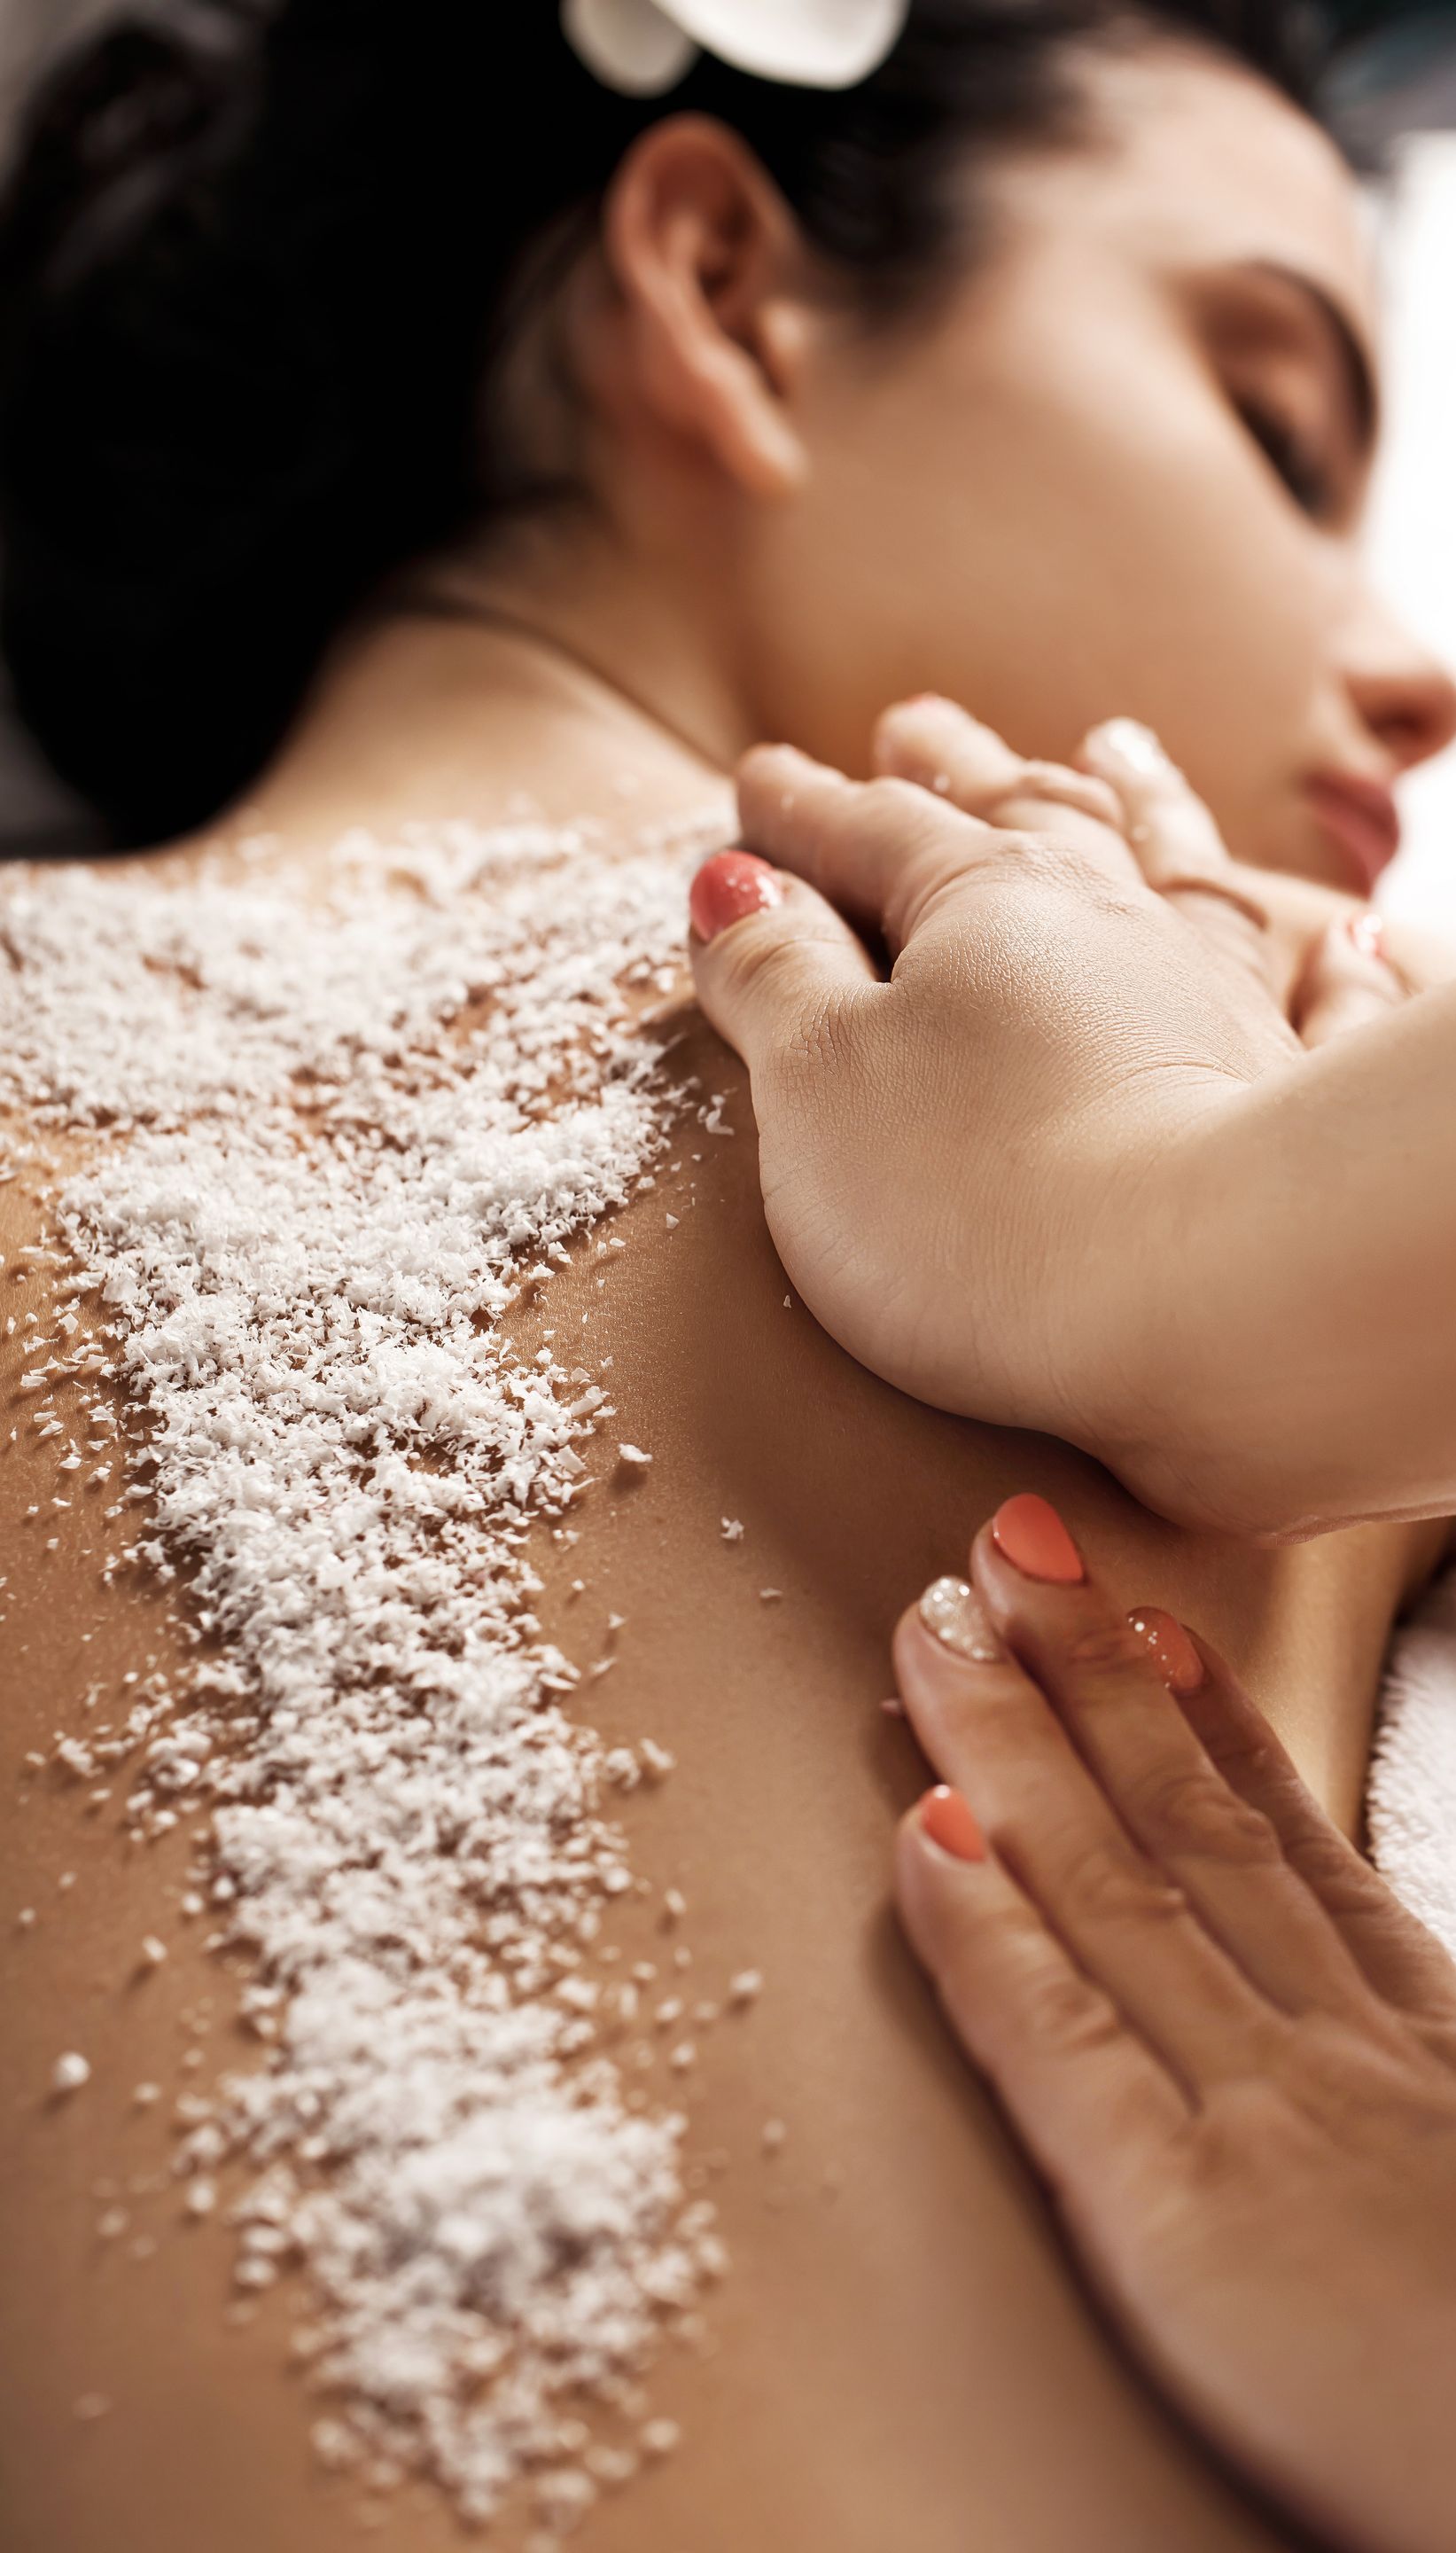 A woman is getting a massage with sea salt on her back.